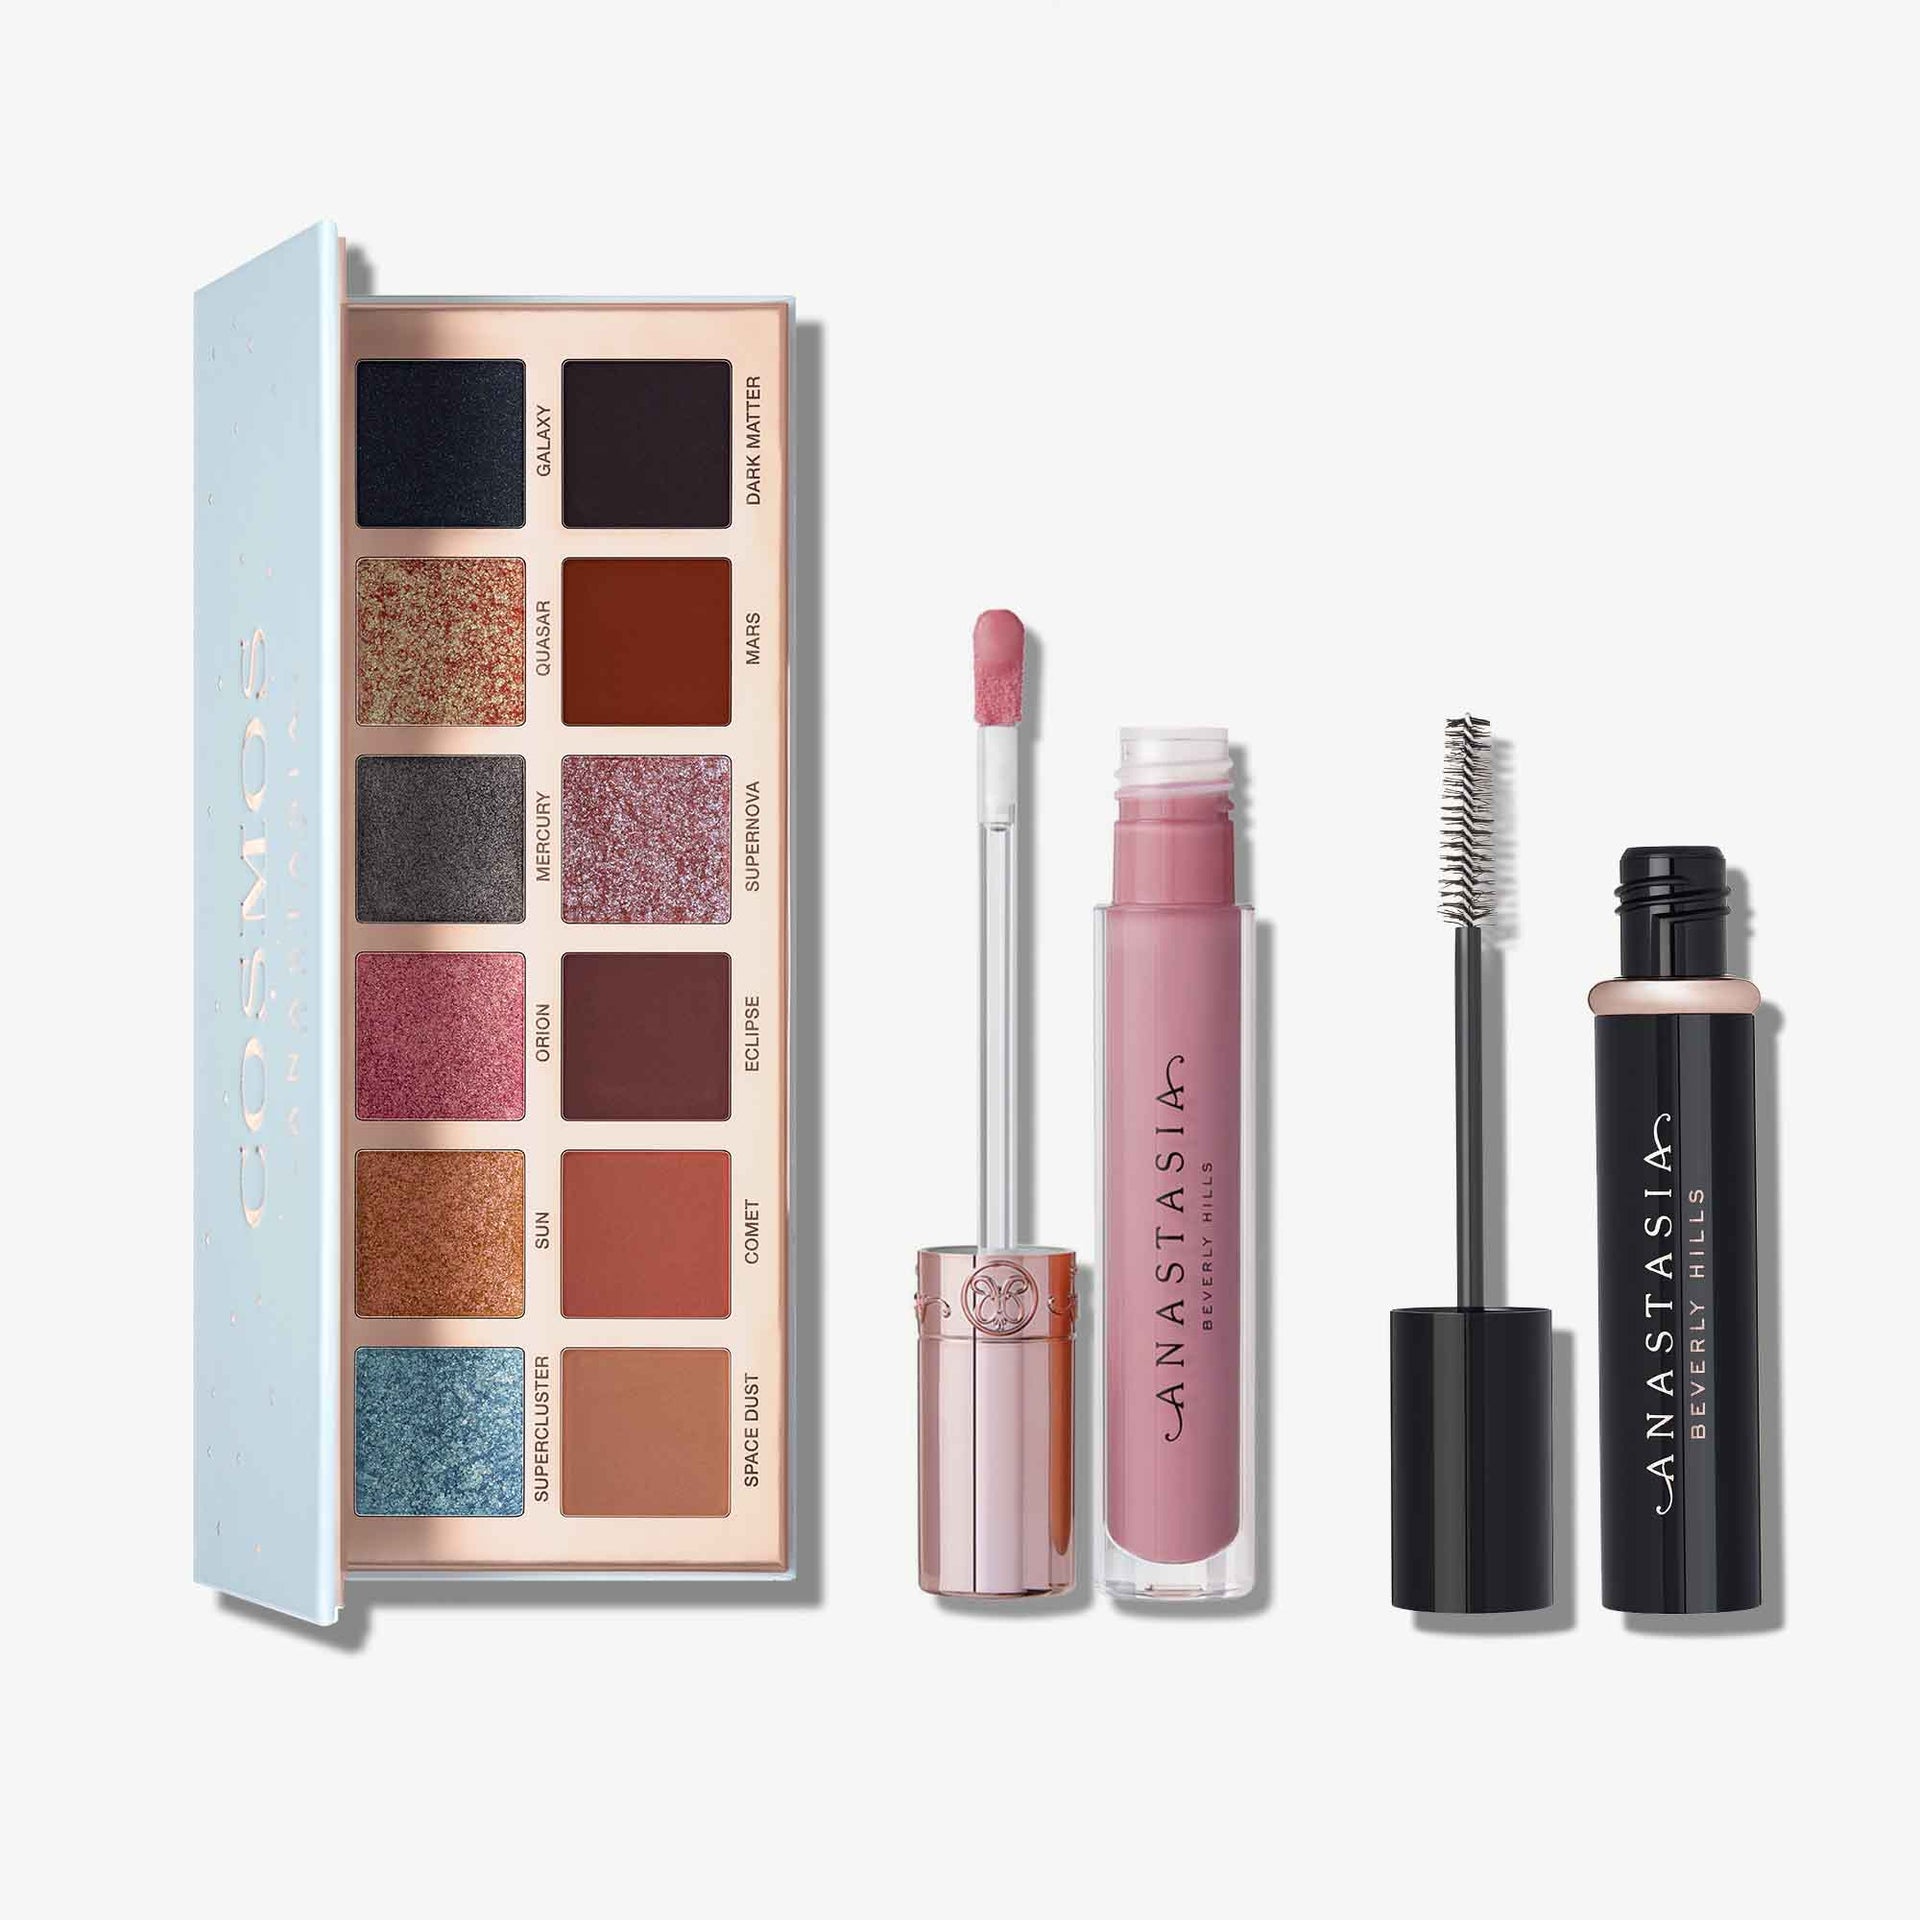 Cotton Candy |Lash Sculpt Lengthening + Cosmos Eyeshadow Palette + Lip Gloss - Cotton Candy